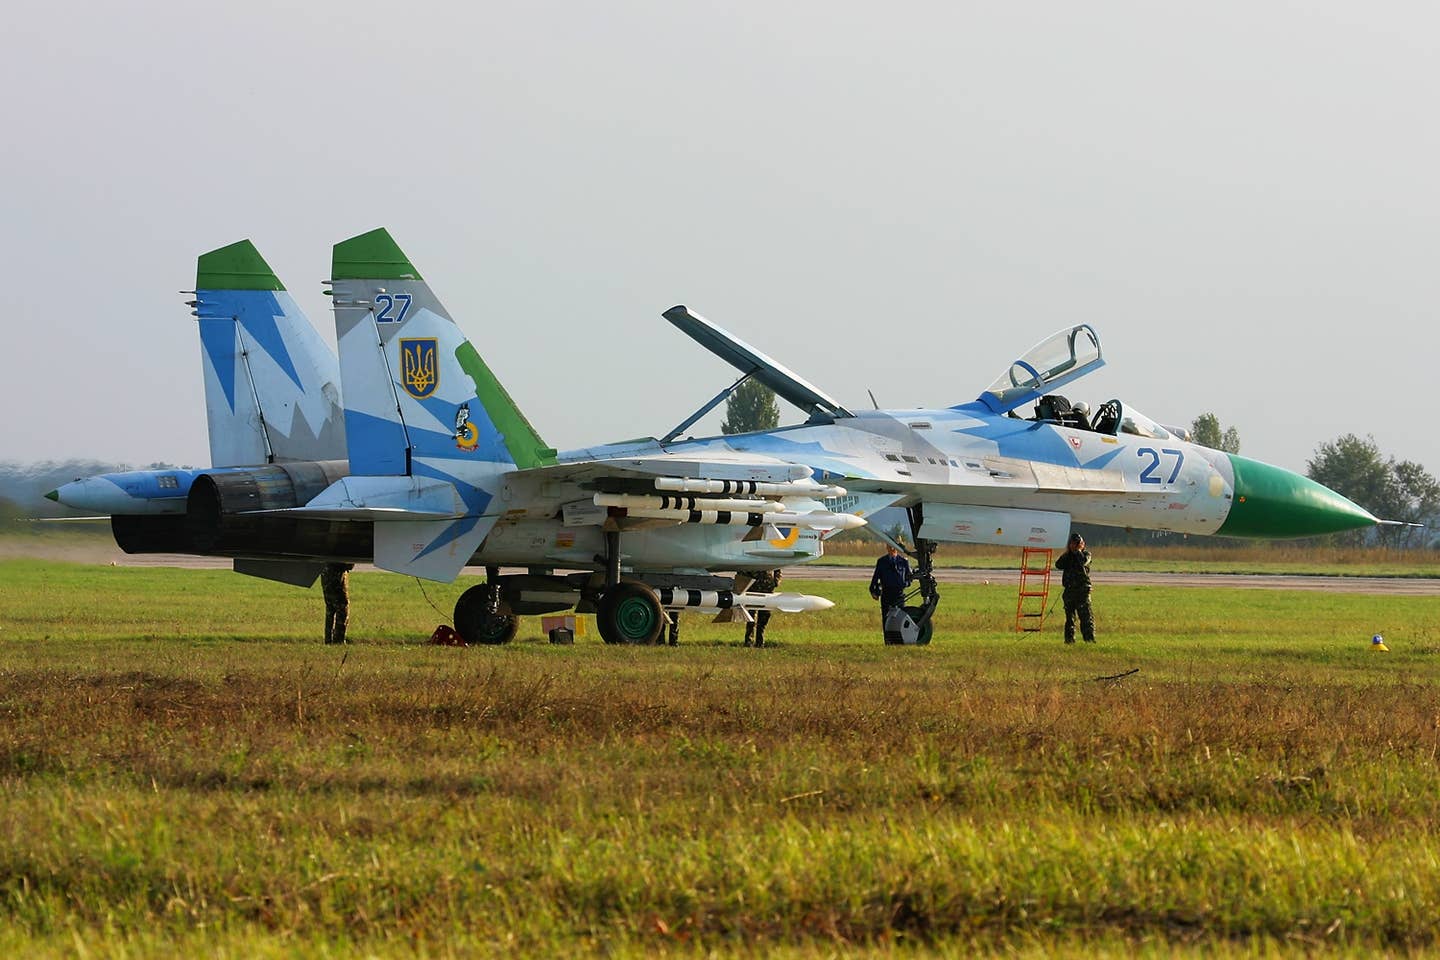 A Ukrainian Air Force Su-27 with a green radome and tailfin caps at Kyiv-Gostomel Airport in September 2008. <em>Oleg V. Belyakov/Wikimedia Commons</em>